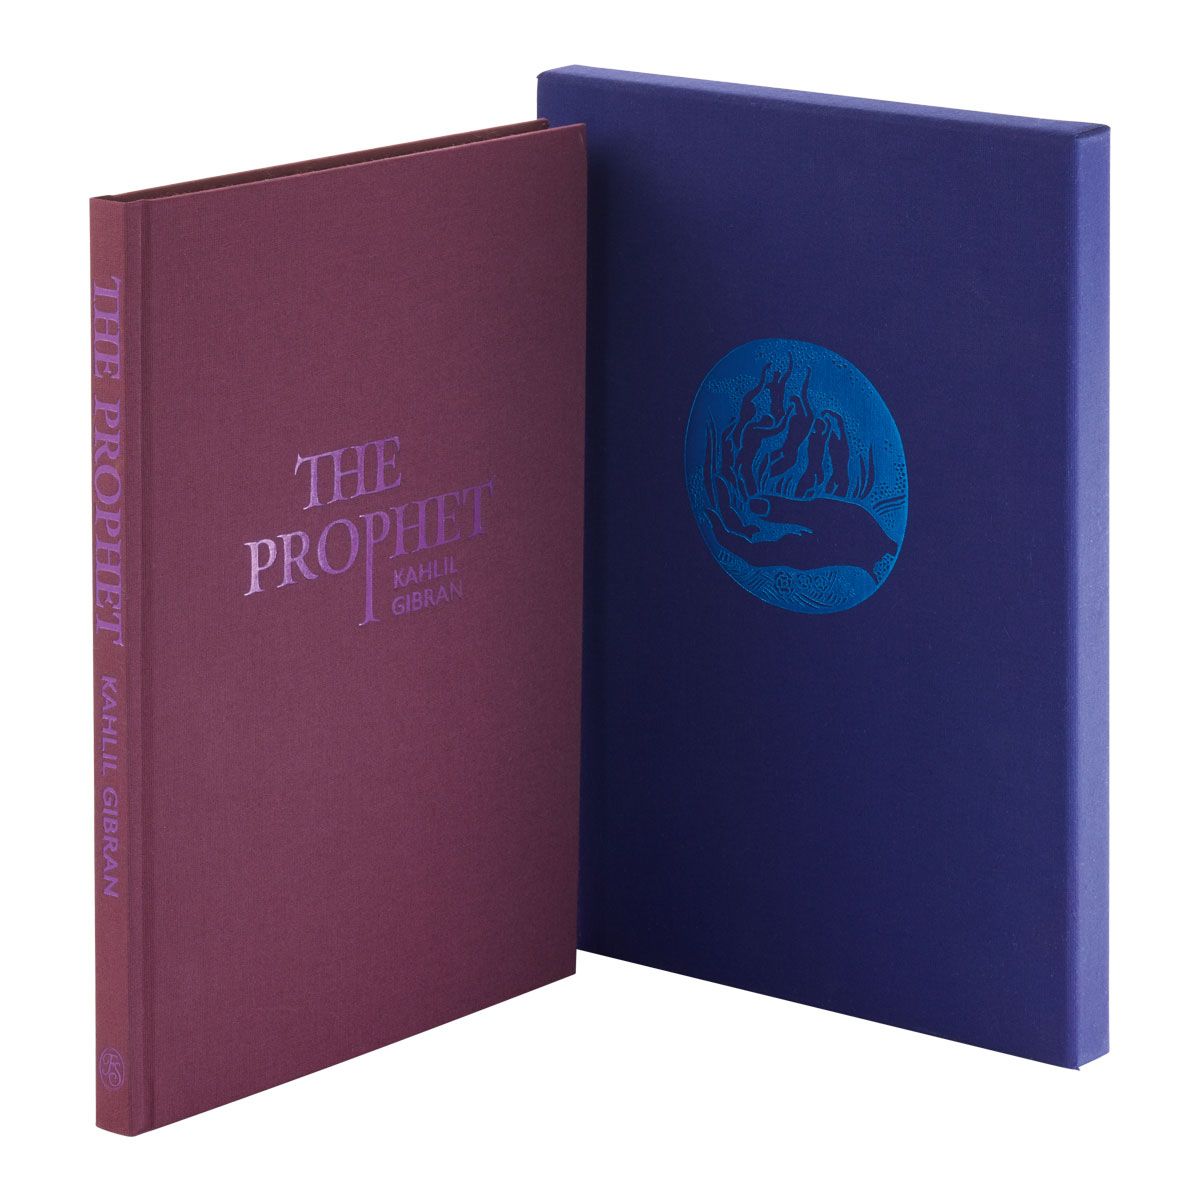 The Folio Society Edition of The Prophet (Front Cover)